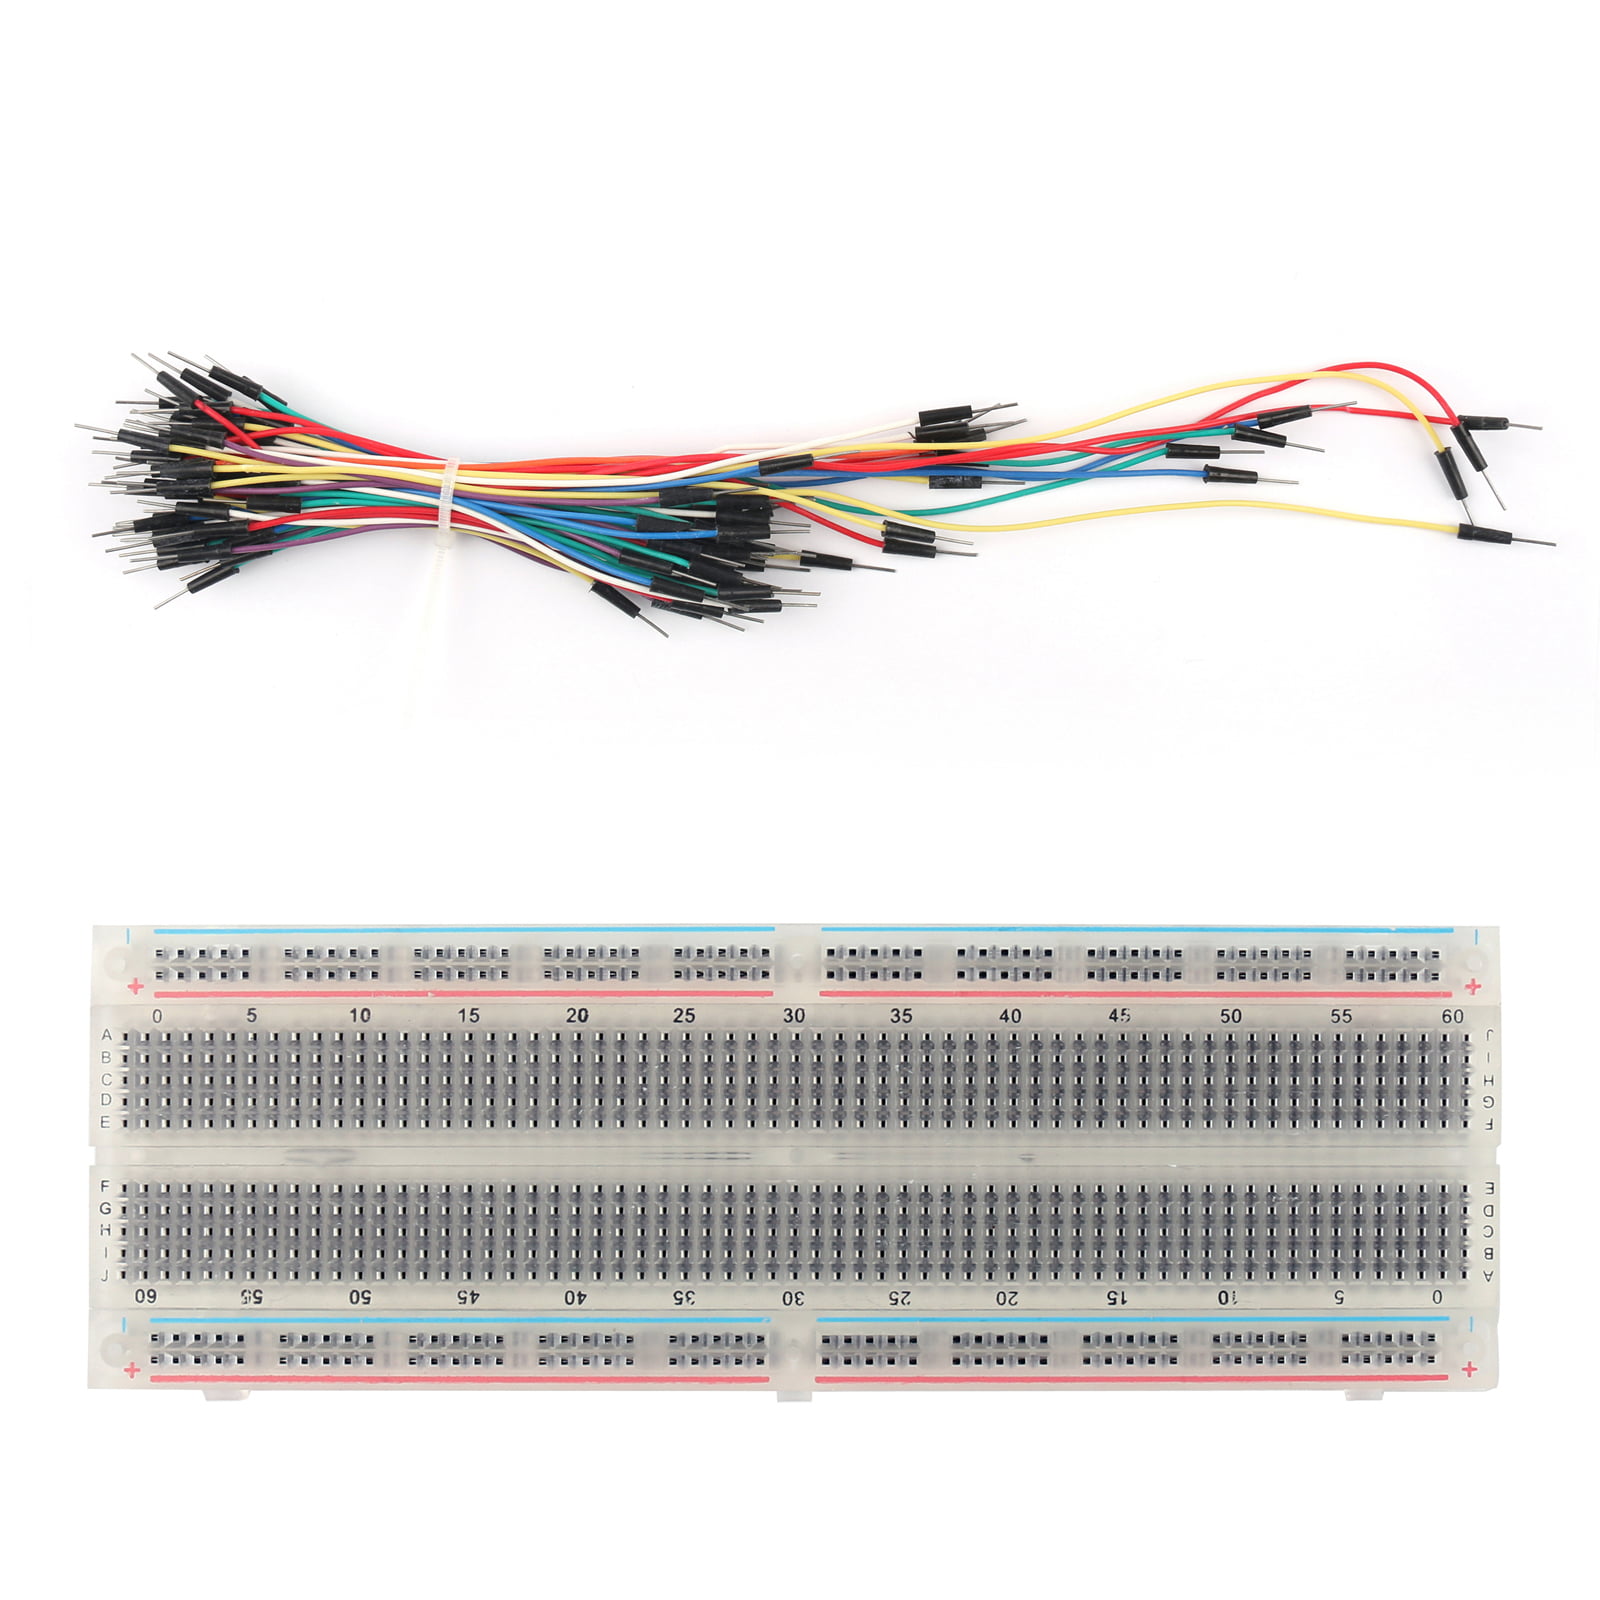 Brand new Breadboard Solderless Flexible Jumper Cable Wires Arduino 65 vary size 